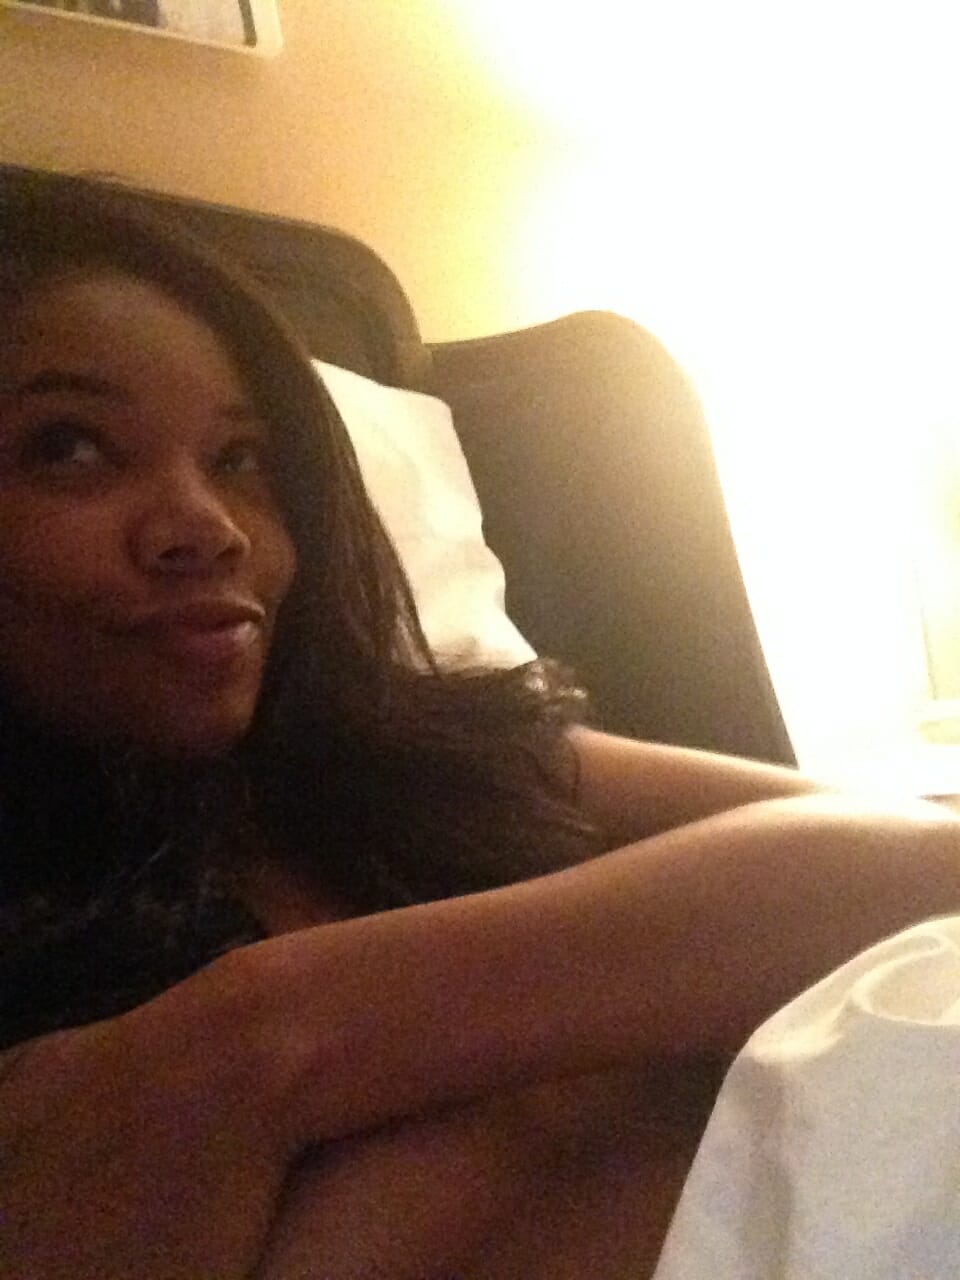 Gabrielle union leaked pictures